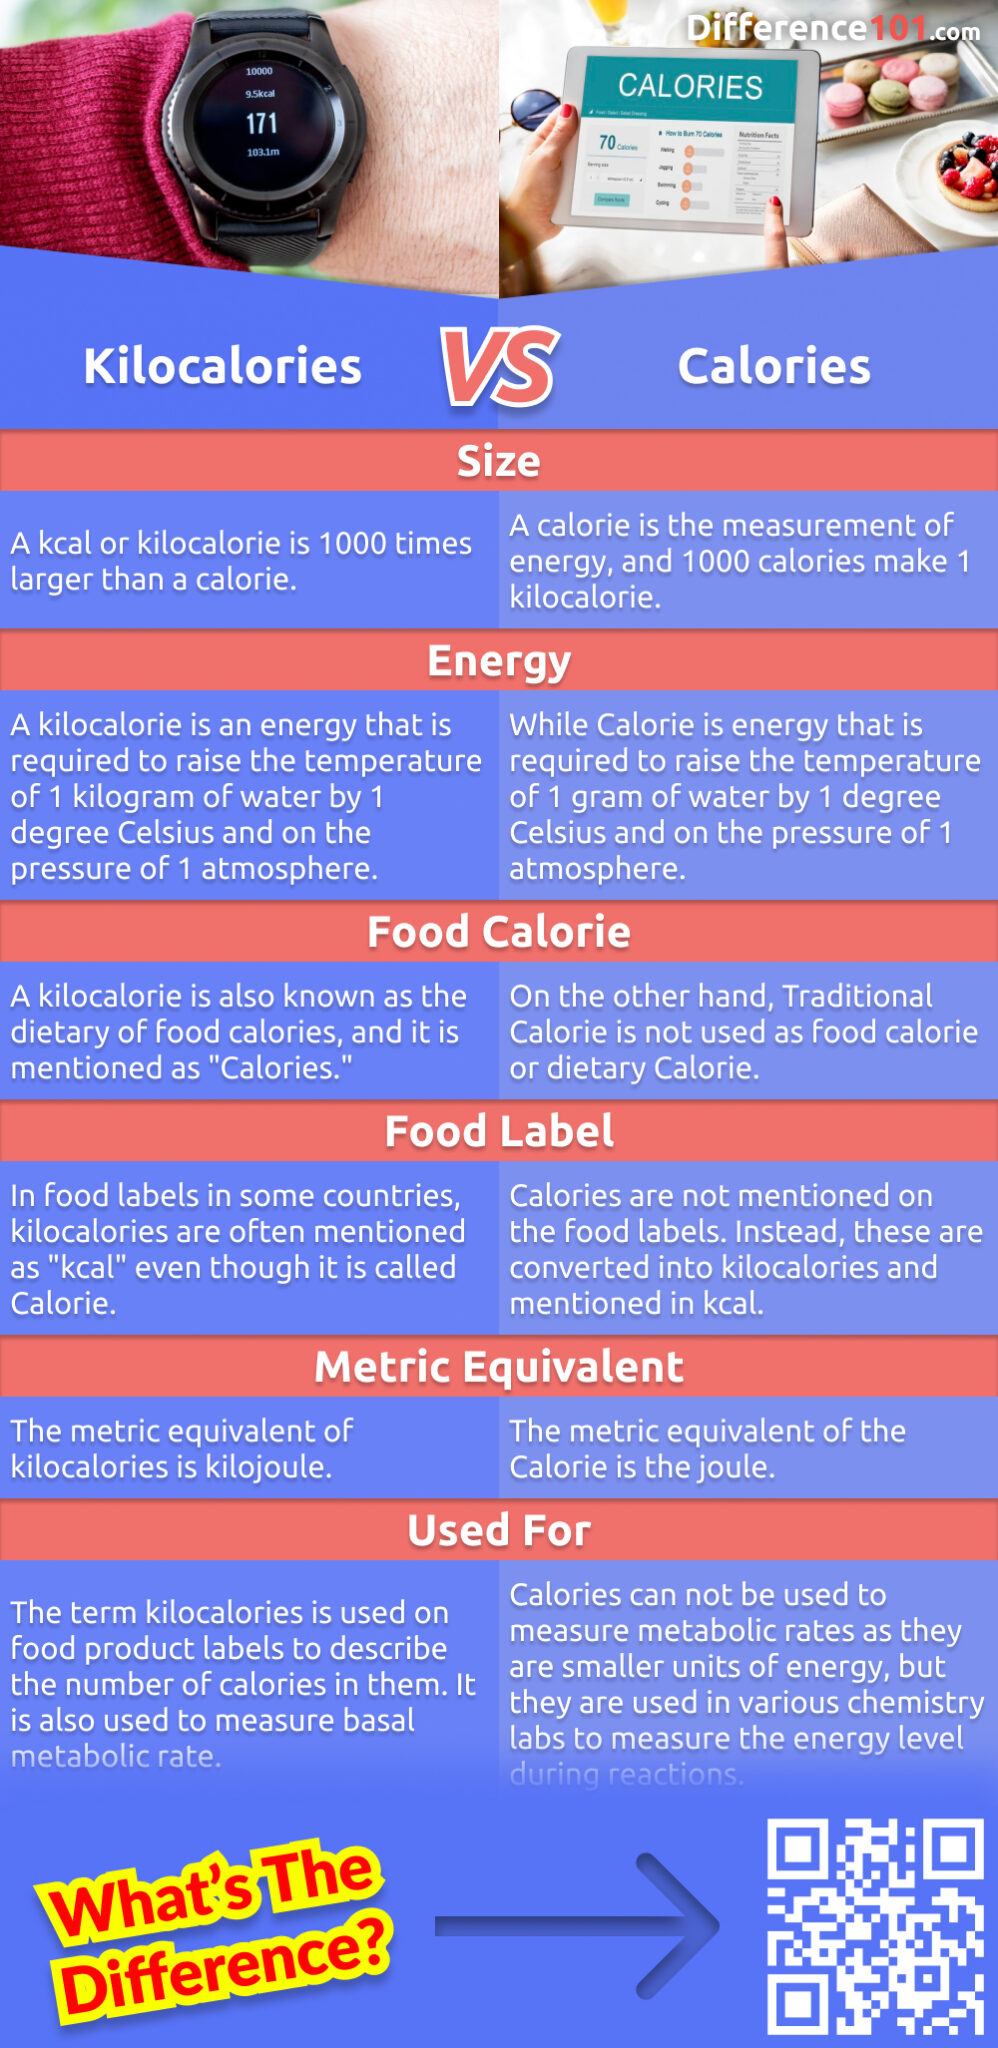 Kilocalories and calories are often used interchangeably, but they are actually two different units of measurement. In this article, we'll explore their pros and cons, provide examples and find out differences about them.